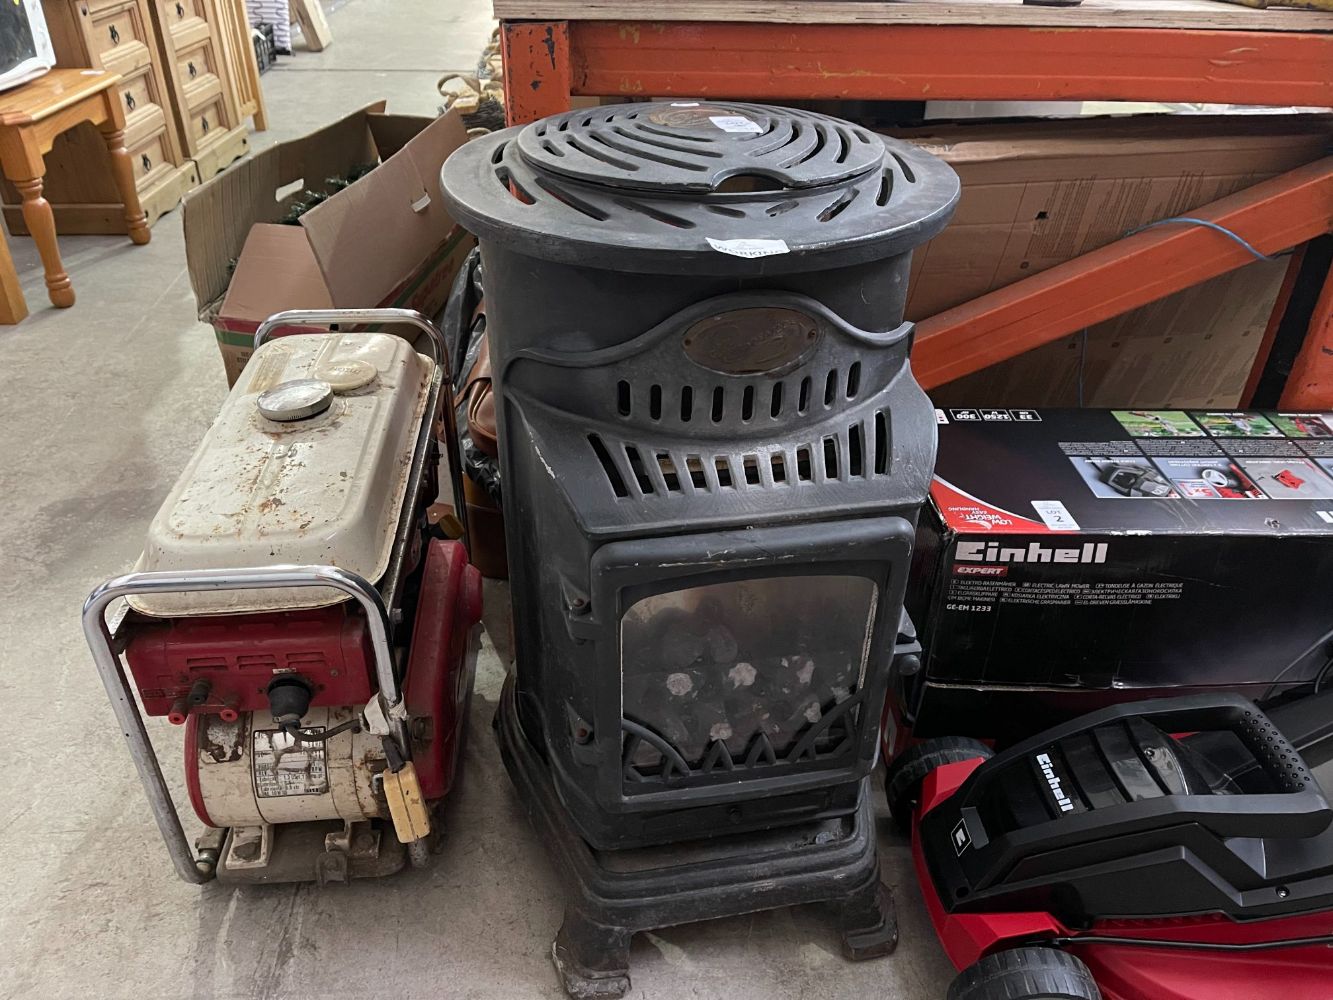 GENERAL ONLINE AUCTION - TOOLS - FURNITURE - HOUSEHOLD ITEMS - 29TH  APRIL ENDING FROM 7PM -  P&P